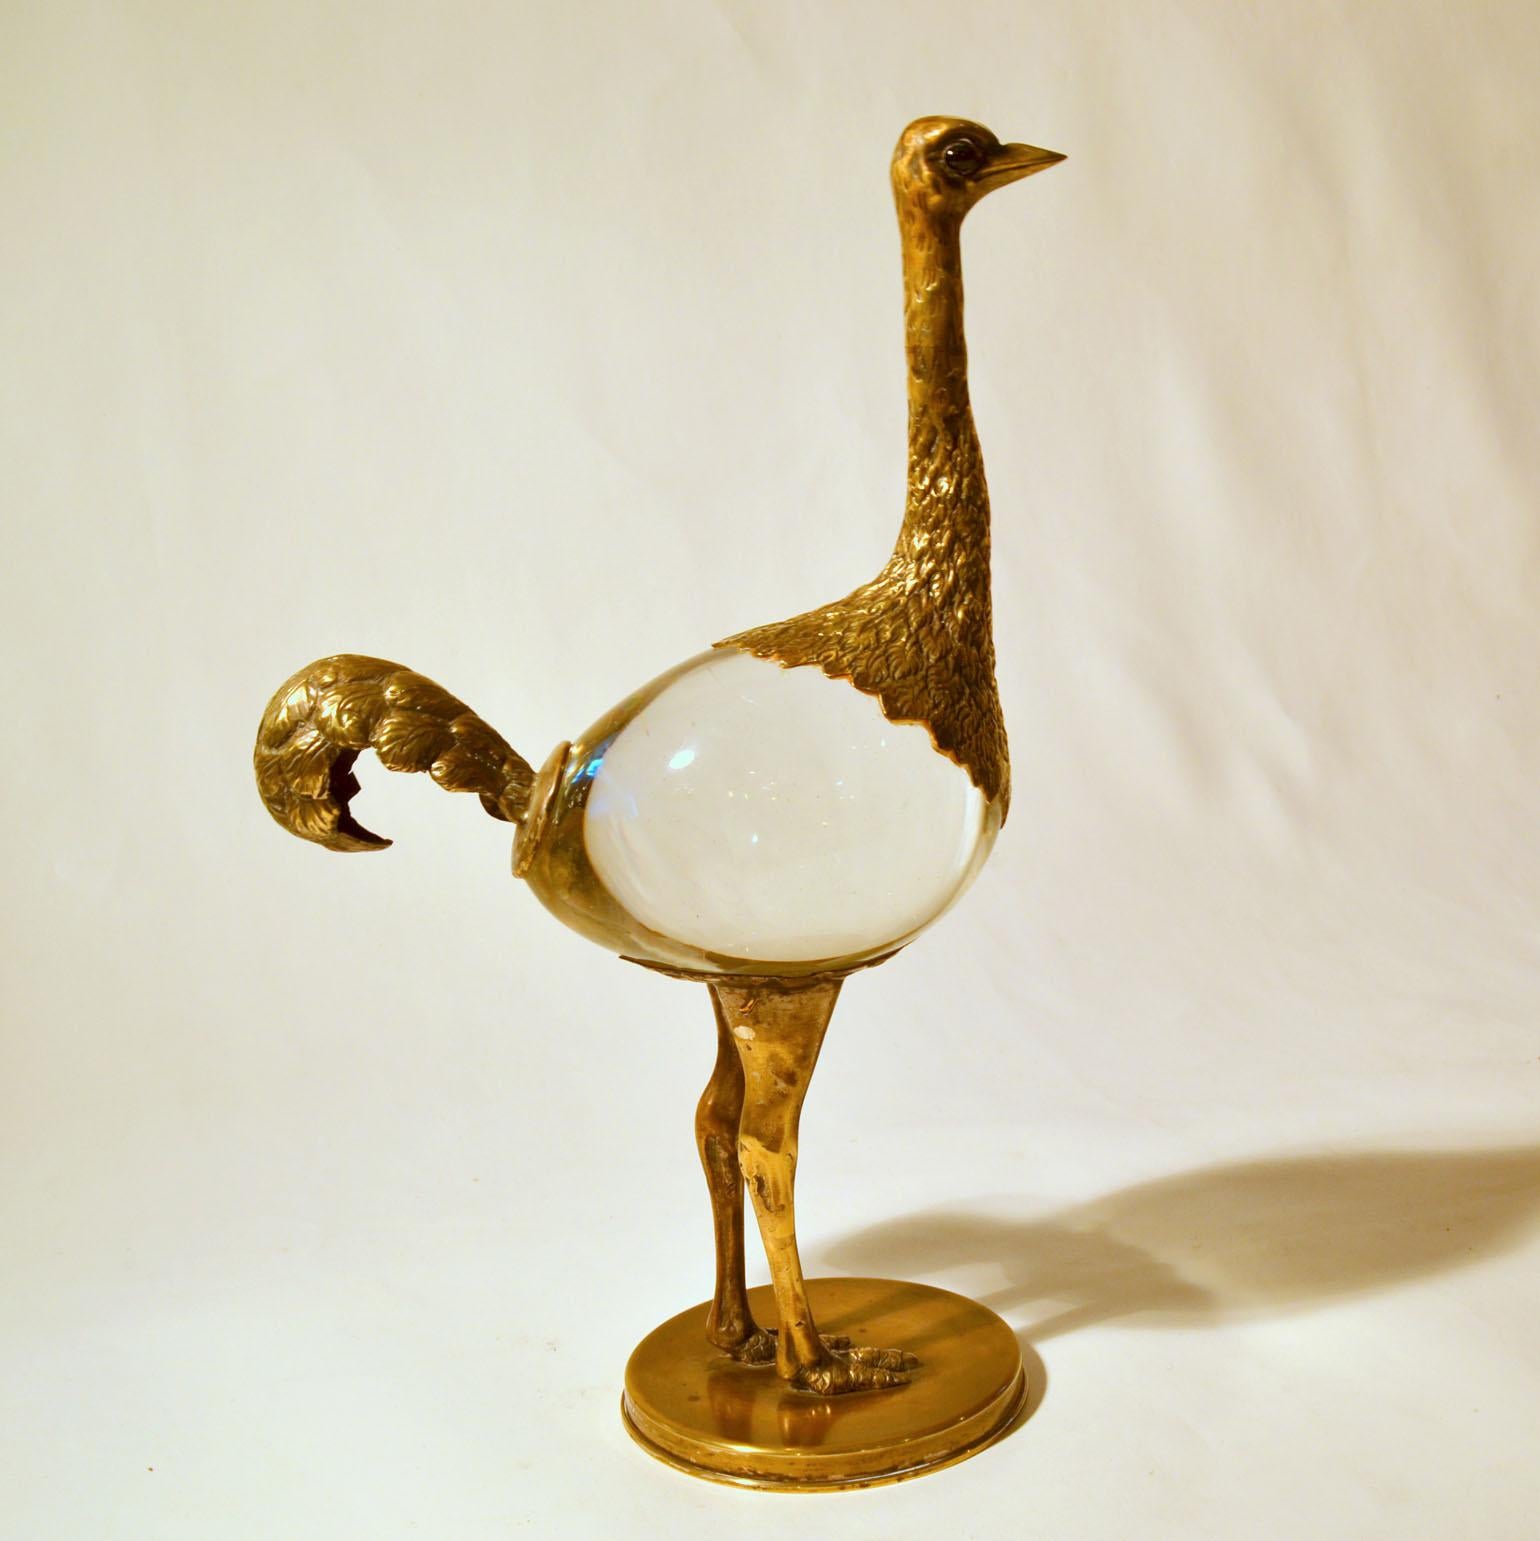 Ostrich bird sculpture in brass and Murano blown glass encased on brass Stand, signed by Franco Lagini, 1970, made in Italy.